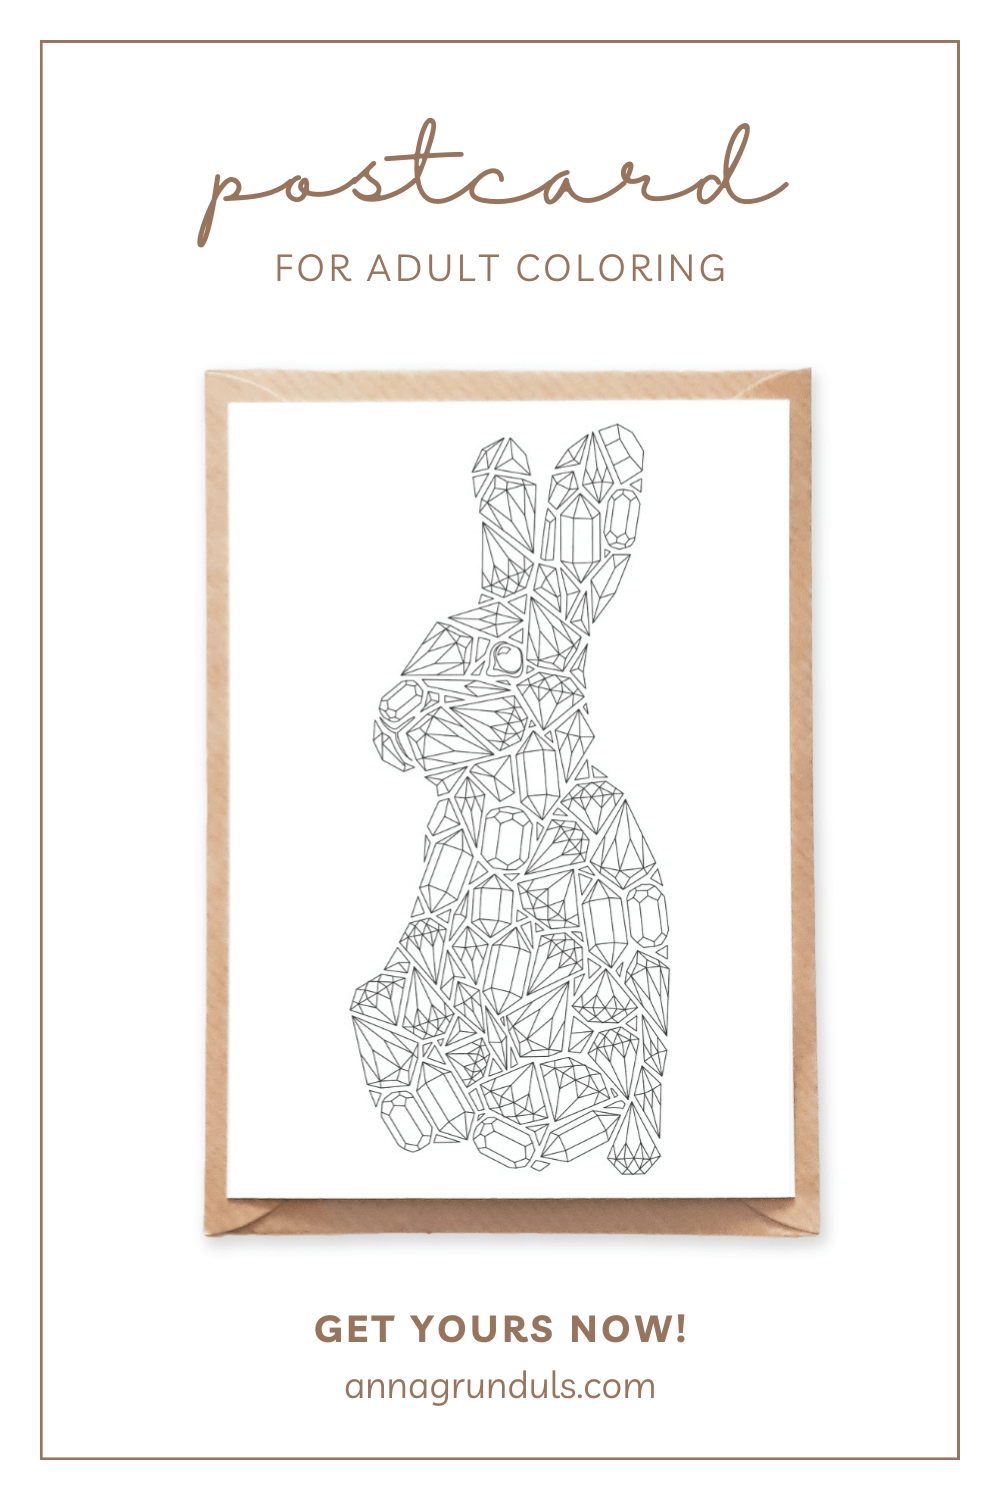 rabbit postcard for adult coloring pinterest pin